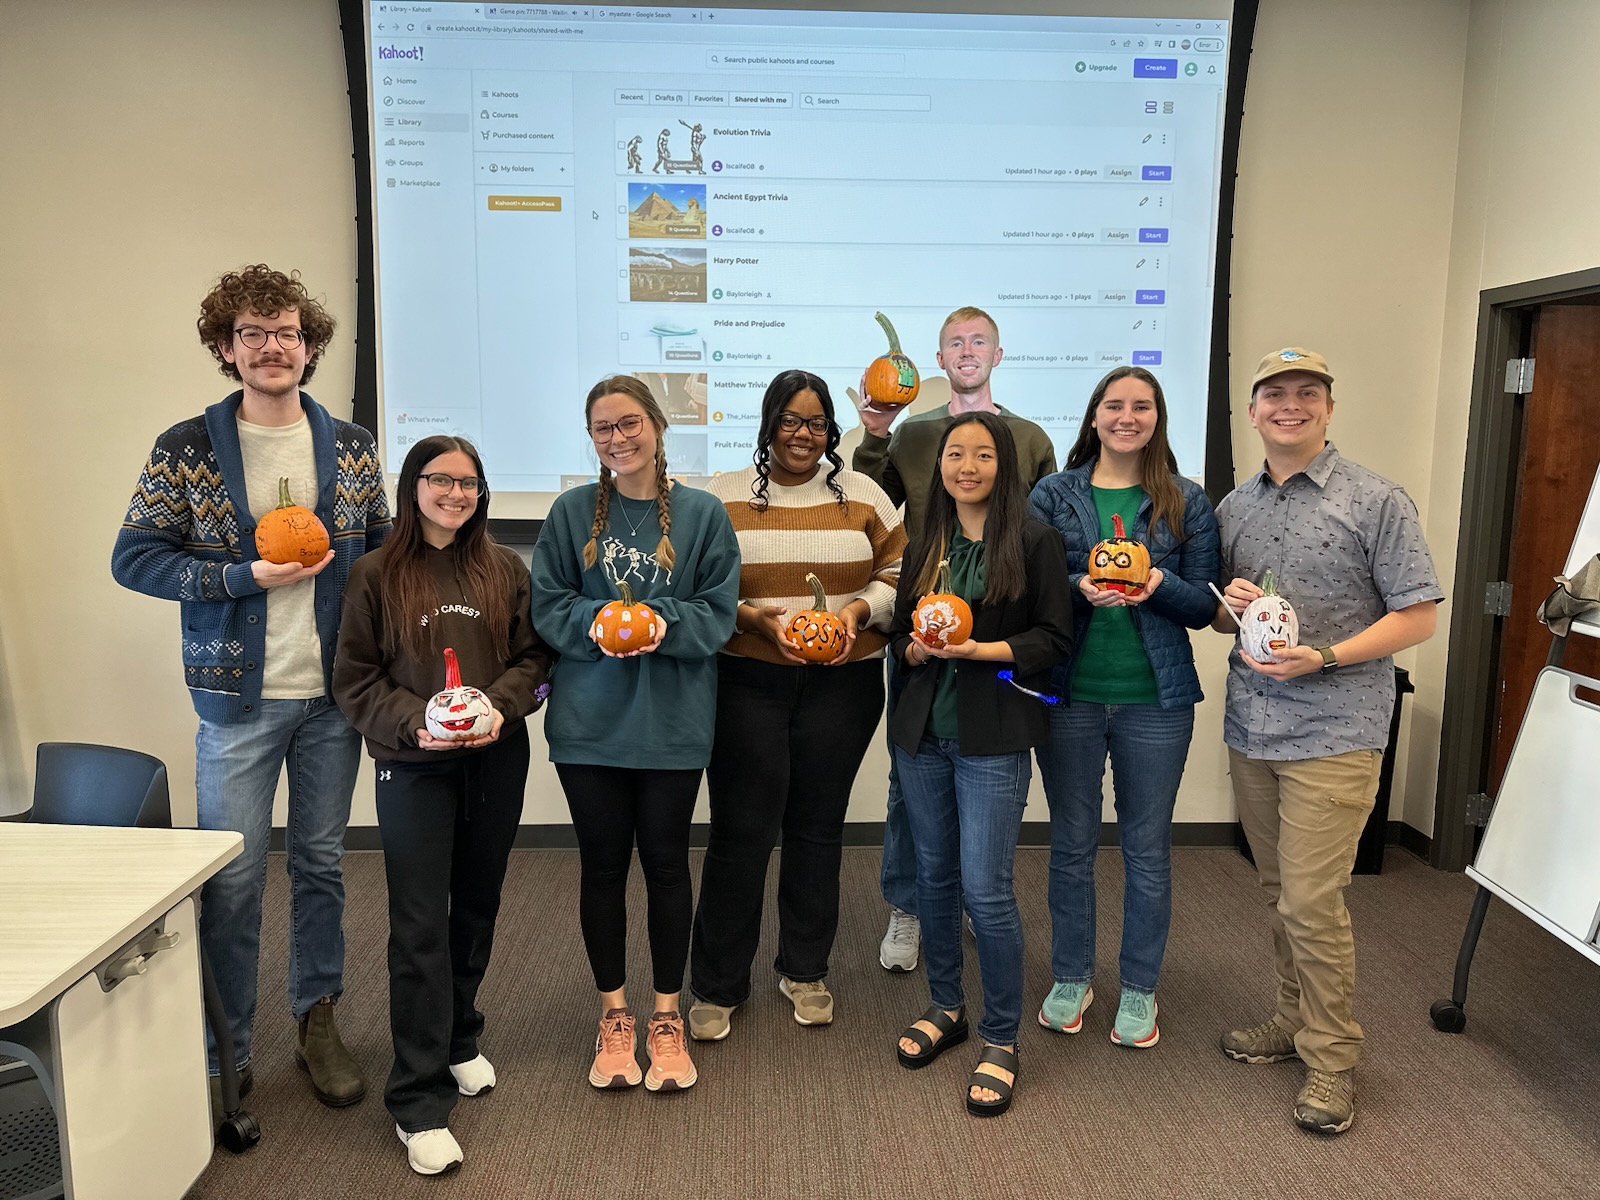 CoSM Ambassadors showing of their decorated pumpkins during the SMART Center Trivia Night